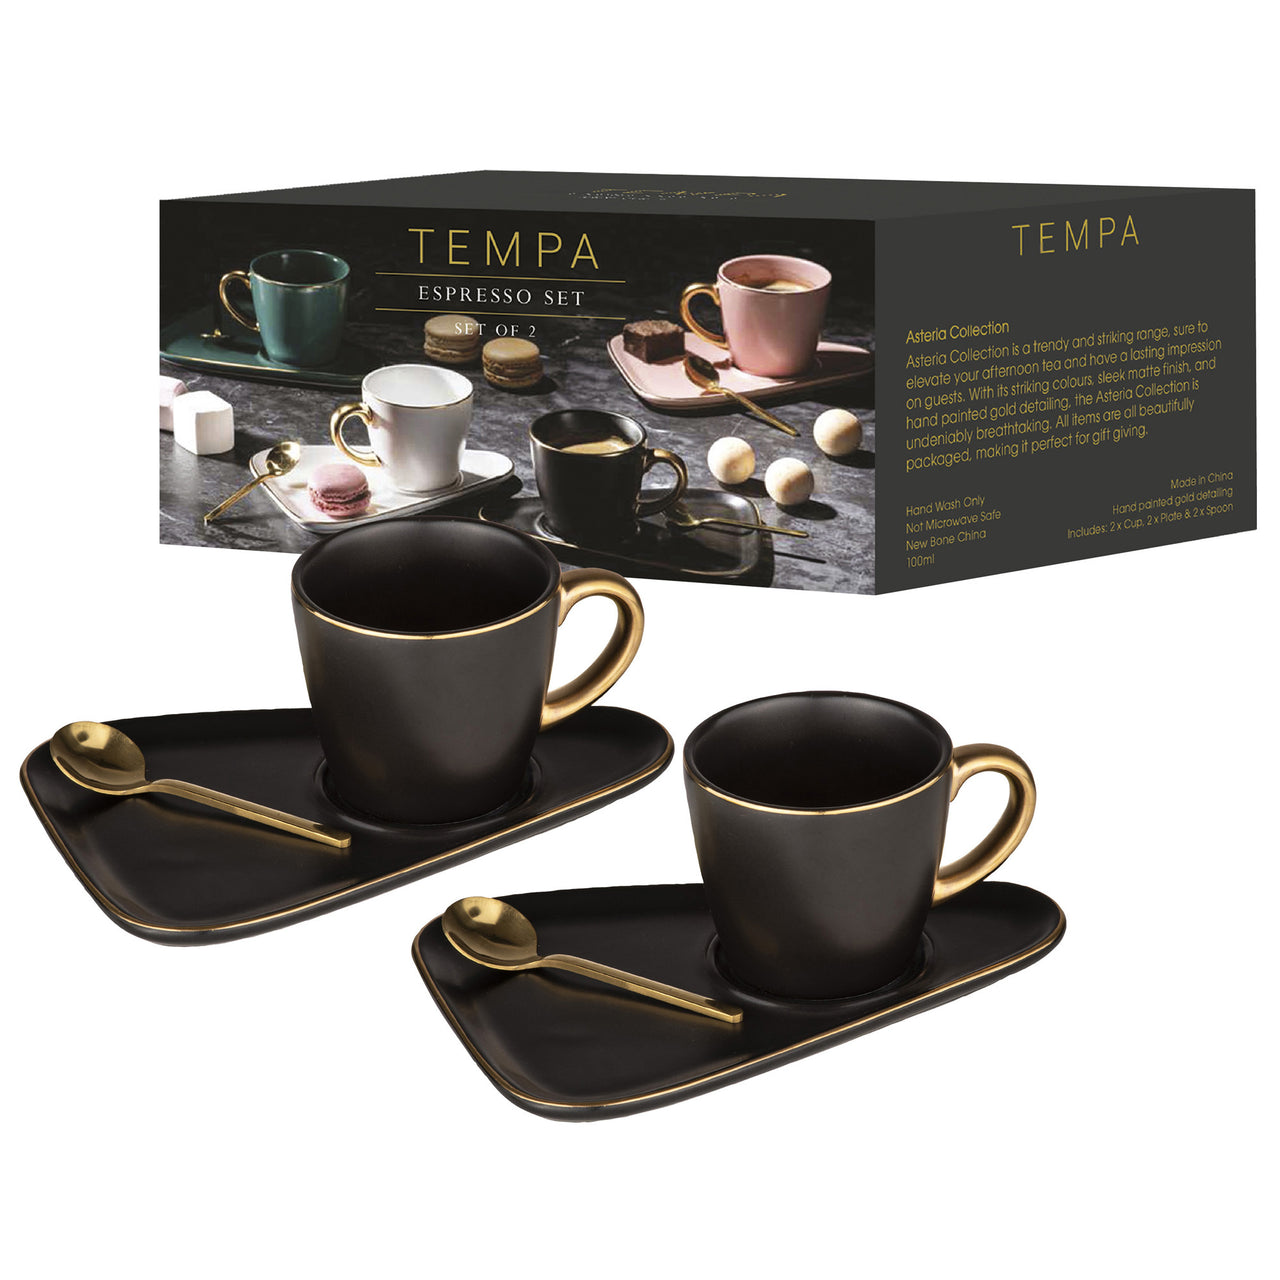 Black Asteria 80ml Espresso Cups & Saucers with Spoons (Set of 2)